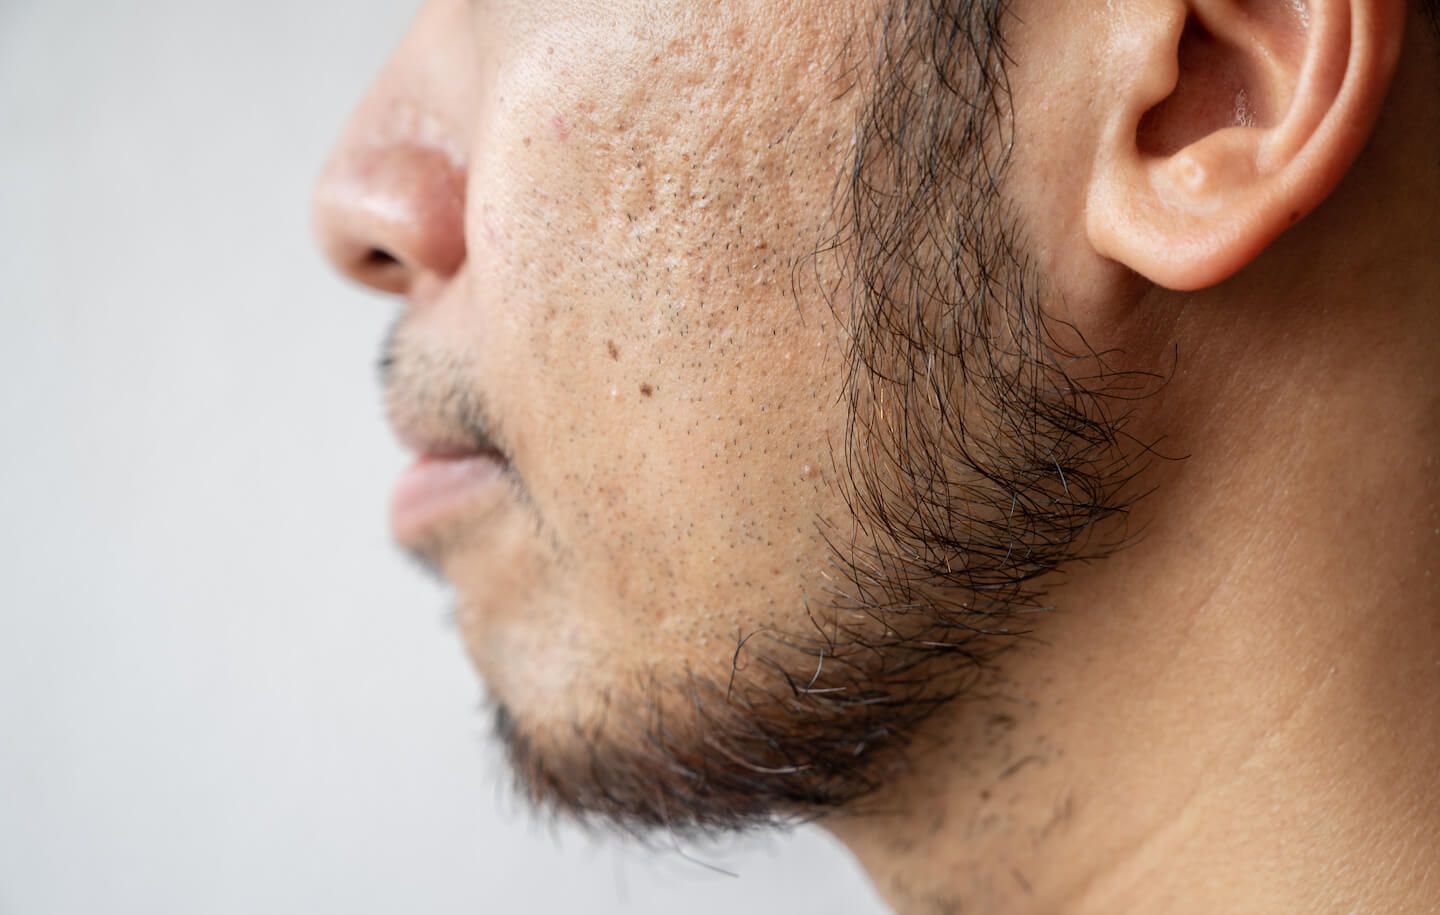 Side view of Asian man face with beard and acne scars